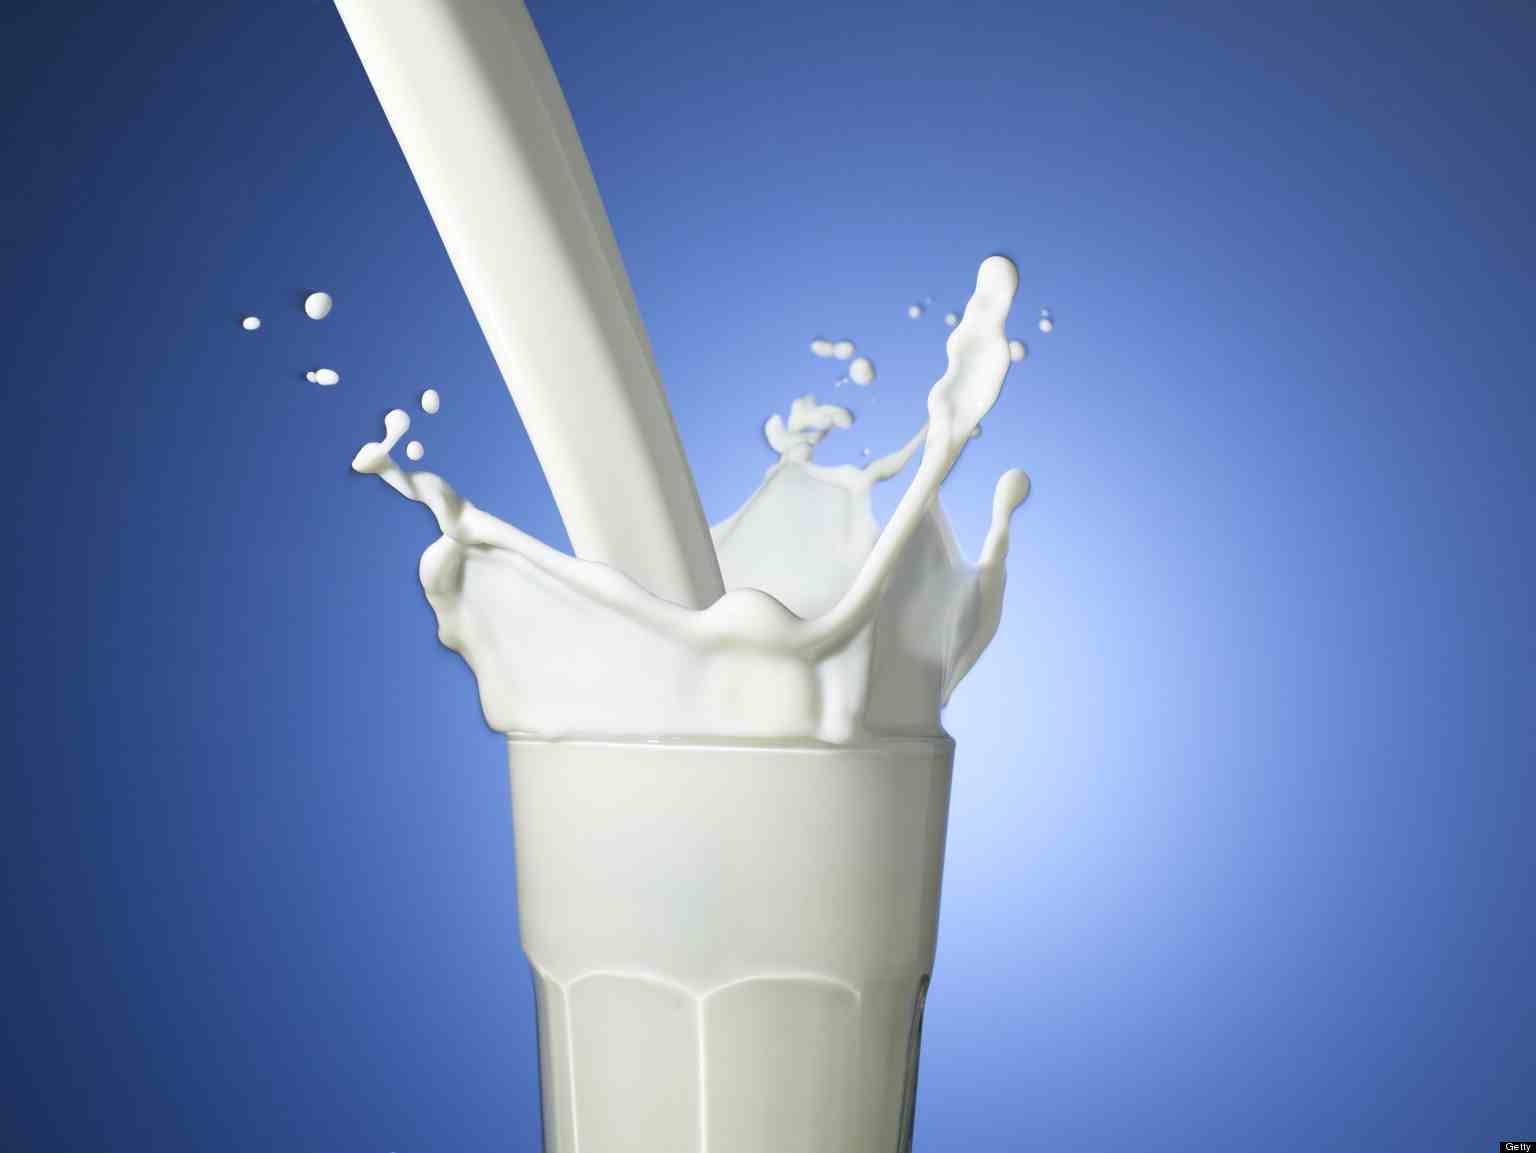 The formation of milk is by itself an enormous creation miracle. And it is another miracle altogether that such detailed information about that formation should be contained in the Qur’an. As we have seen, the information about the biological formation of milk in Surat An-Nahl.